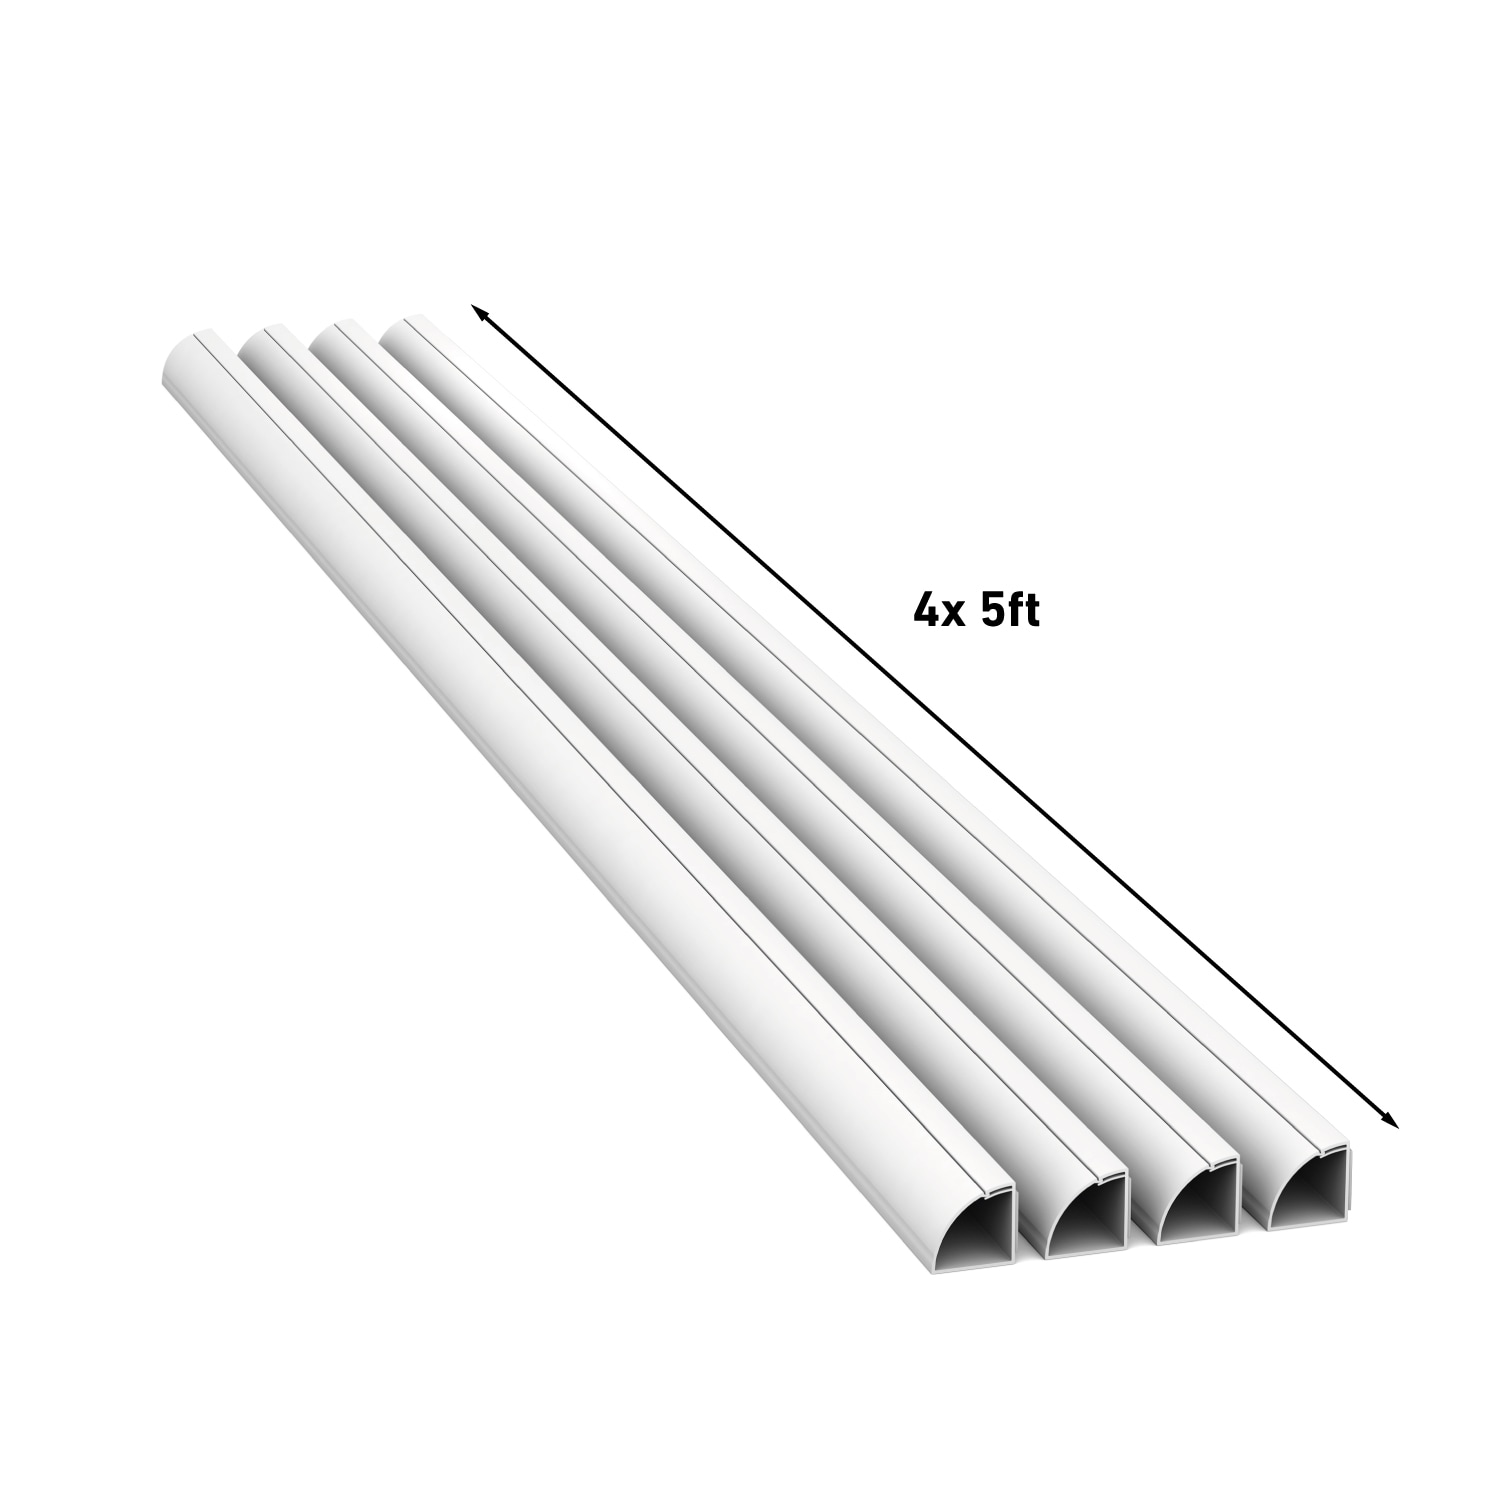  D-Line 15.7 White Quarter Round Cable Raceway, Corner Cord  Cover, Self-Adhesive Floor Molding with Wire Channel, Baseboard Cable Hider  - 0.87 (W) x 0.87 (H) x 15.7-inch Length - White 